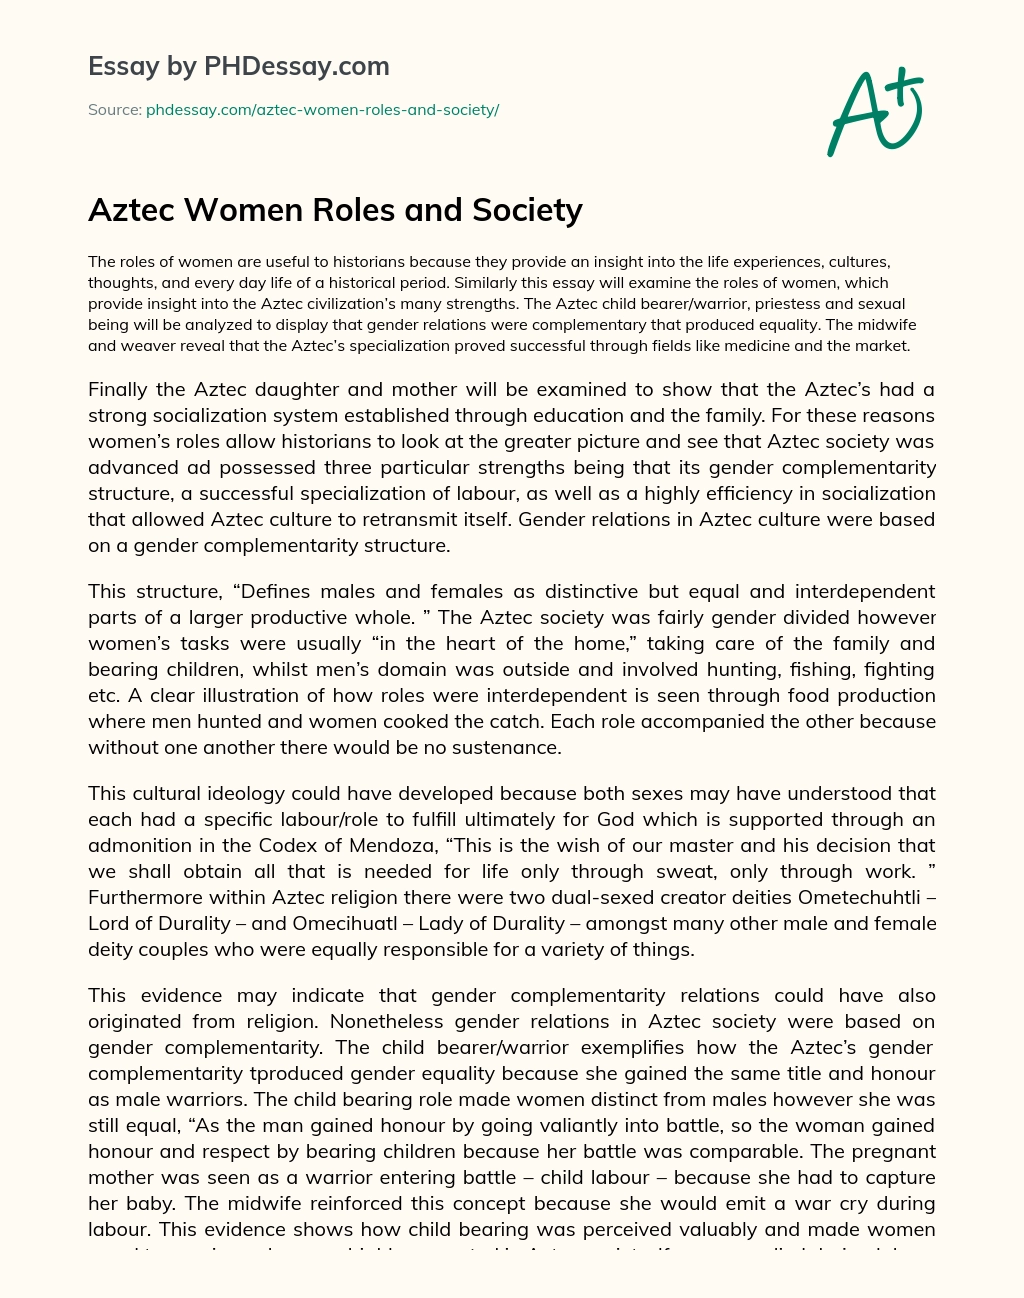 Aztec Women Roles and Society essay